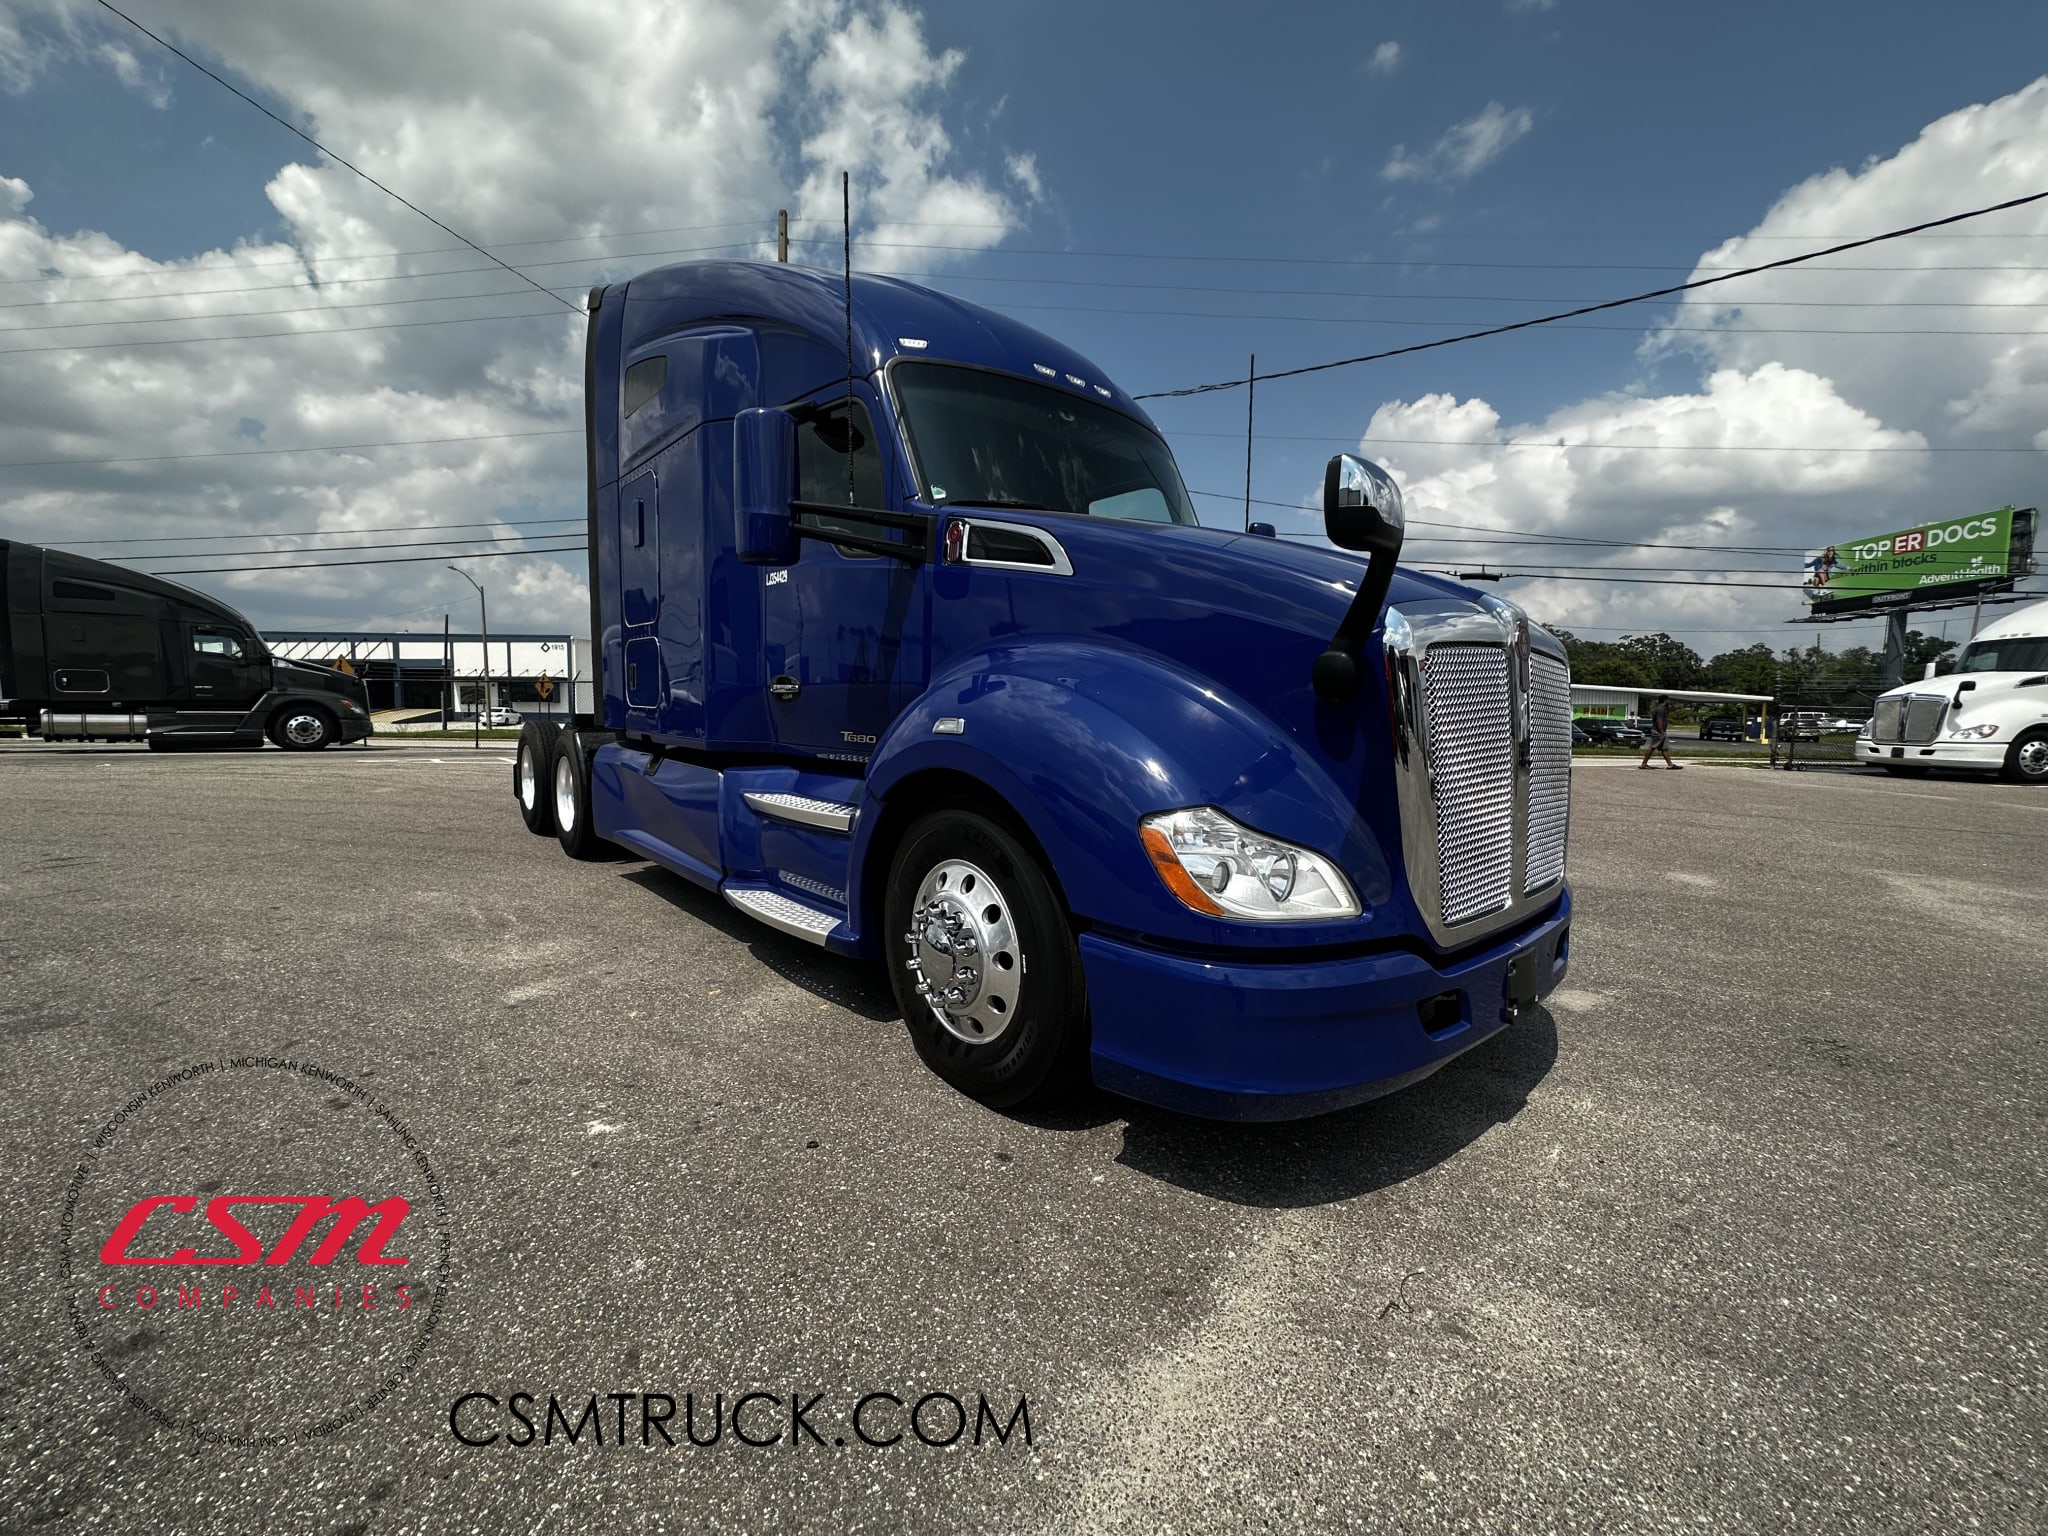 Exterior front passenger side for this 2020 Kenworth T680 (Stock number: ULJ354429)